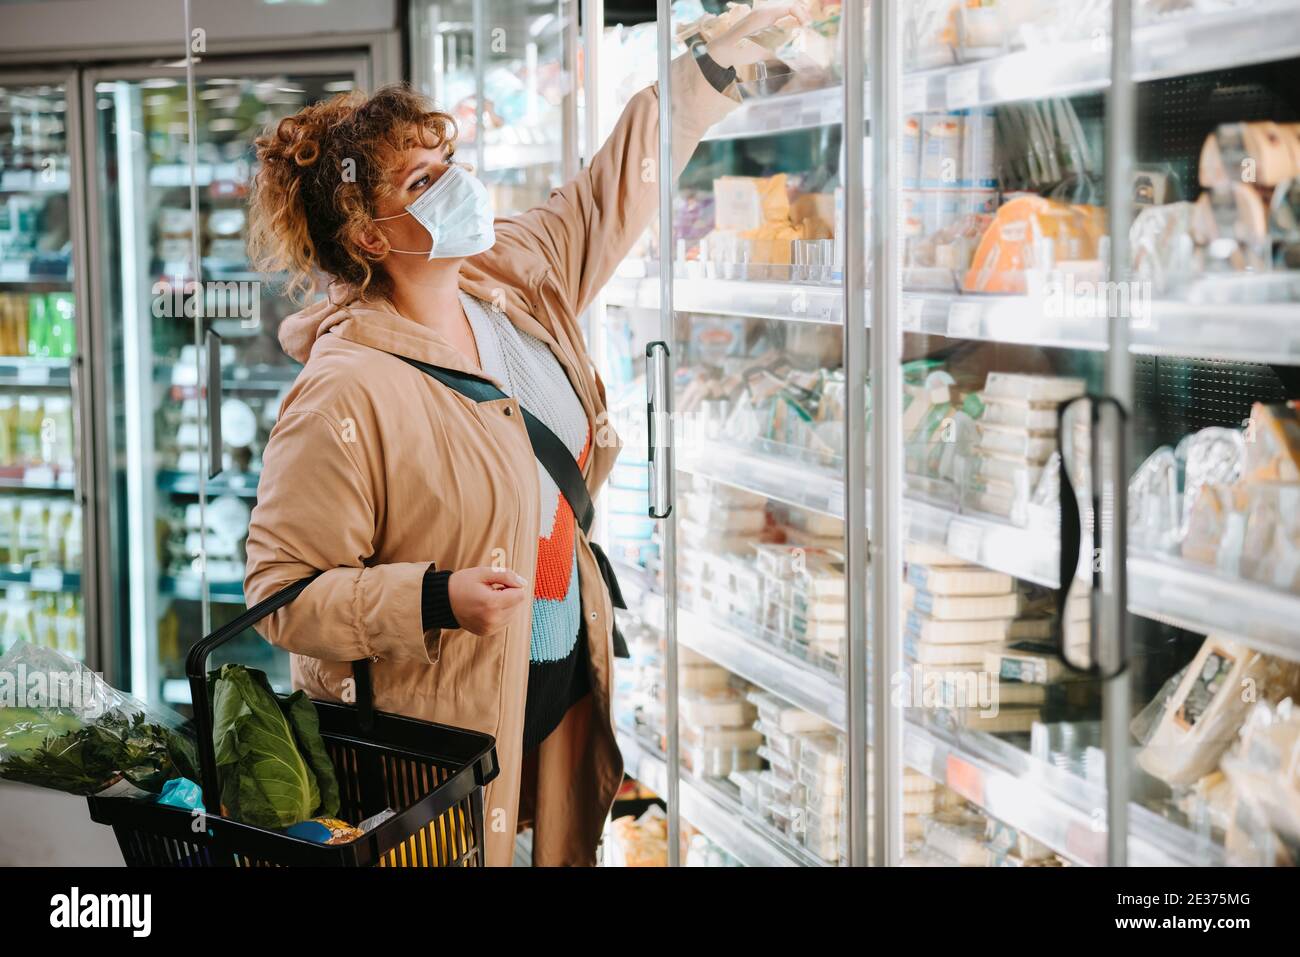 Woman with face mask buying groceries from a supermarket. Female customer shopping in supermarket during pandemic. Stock Photo